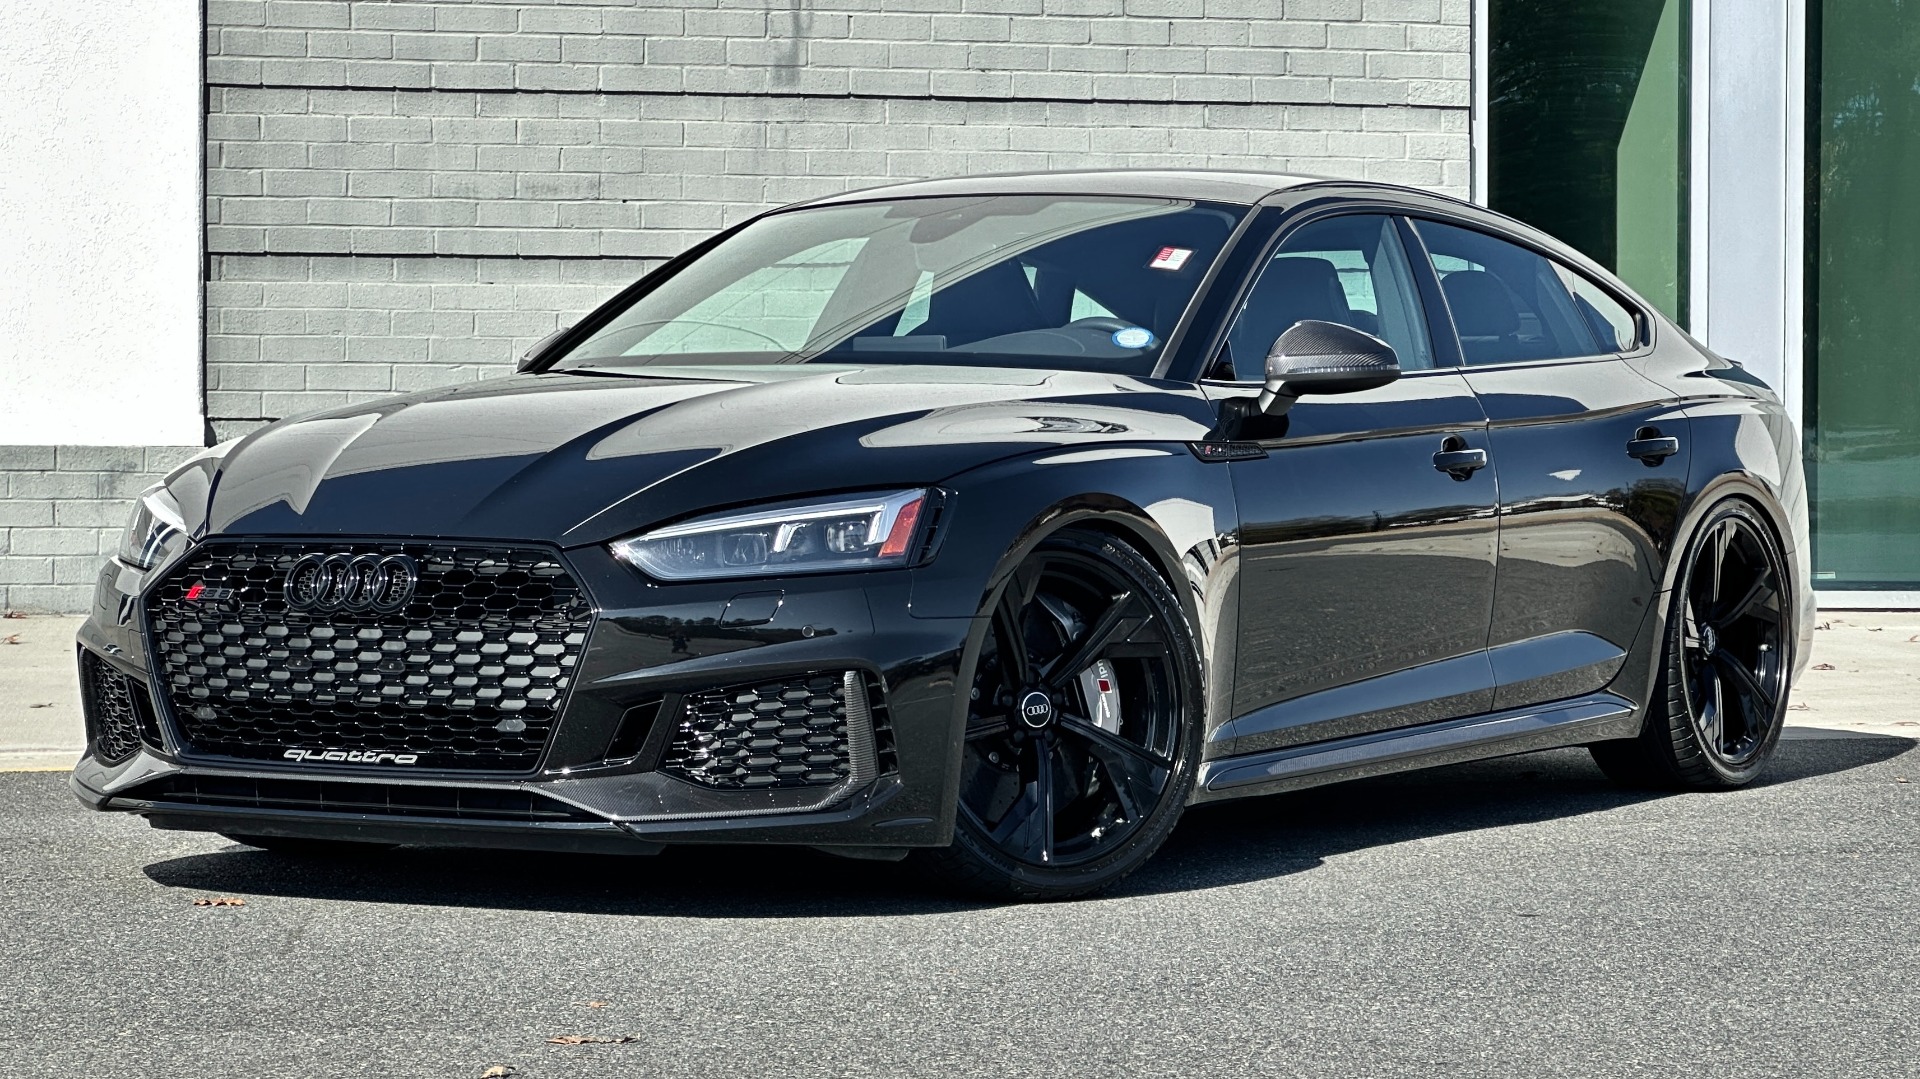 Used 2019 Audi RS 5 Sportback 2.9T QUATTRO / BLACK OPTIC / CARBON FIBER / NAPPA LEATHER / DYNAMIC PLUS for sale $71,999 at Formula Imports in Charlotte NC 28227 1